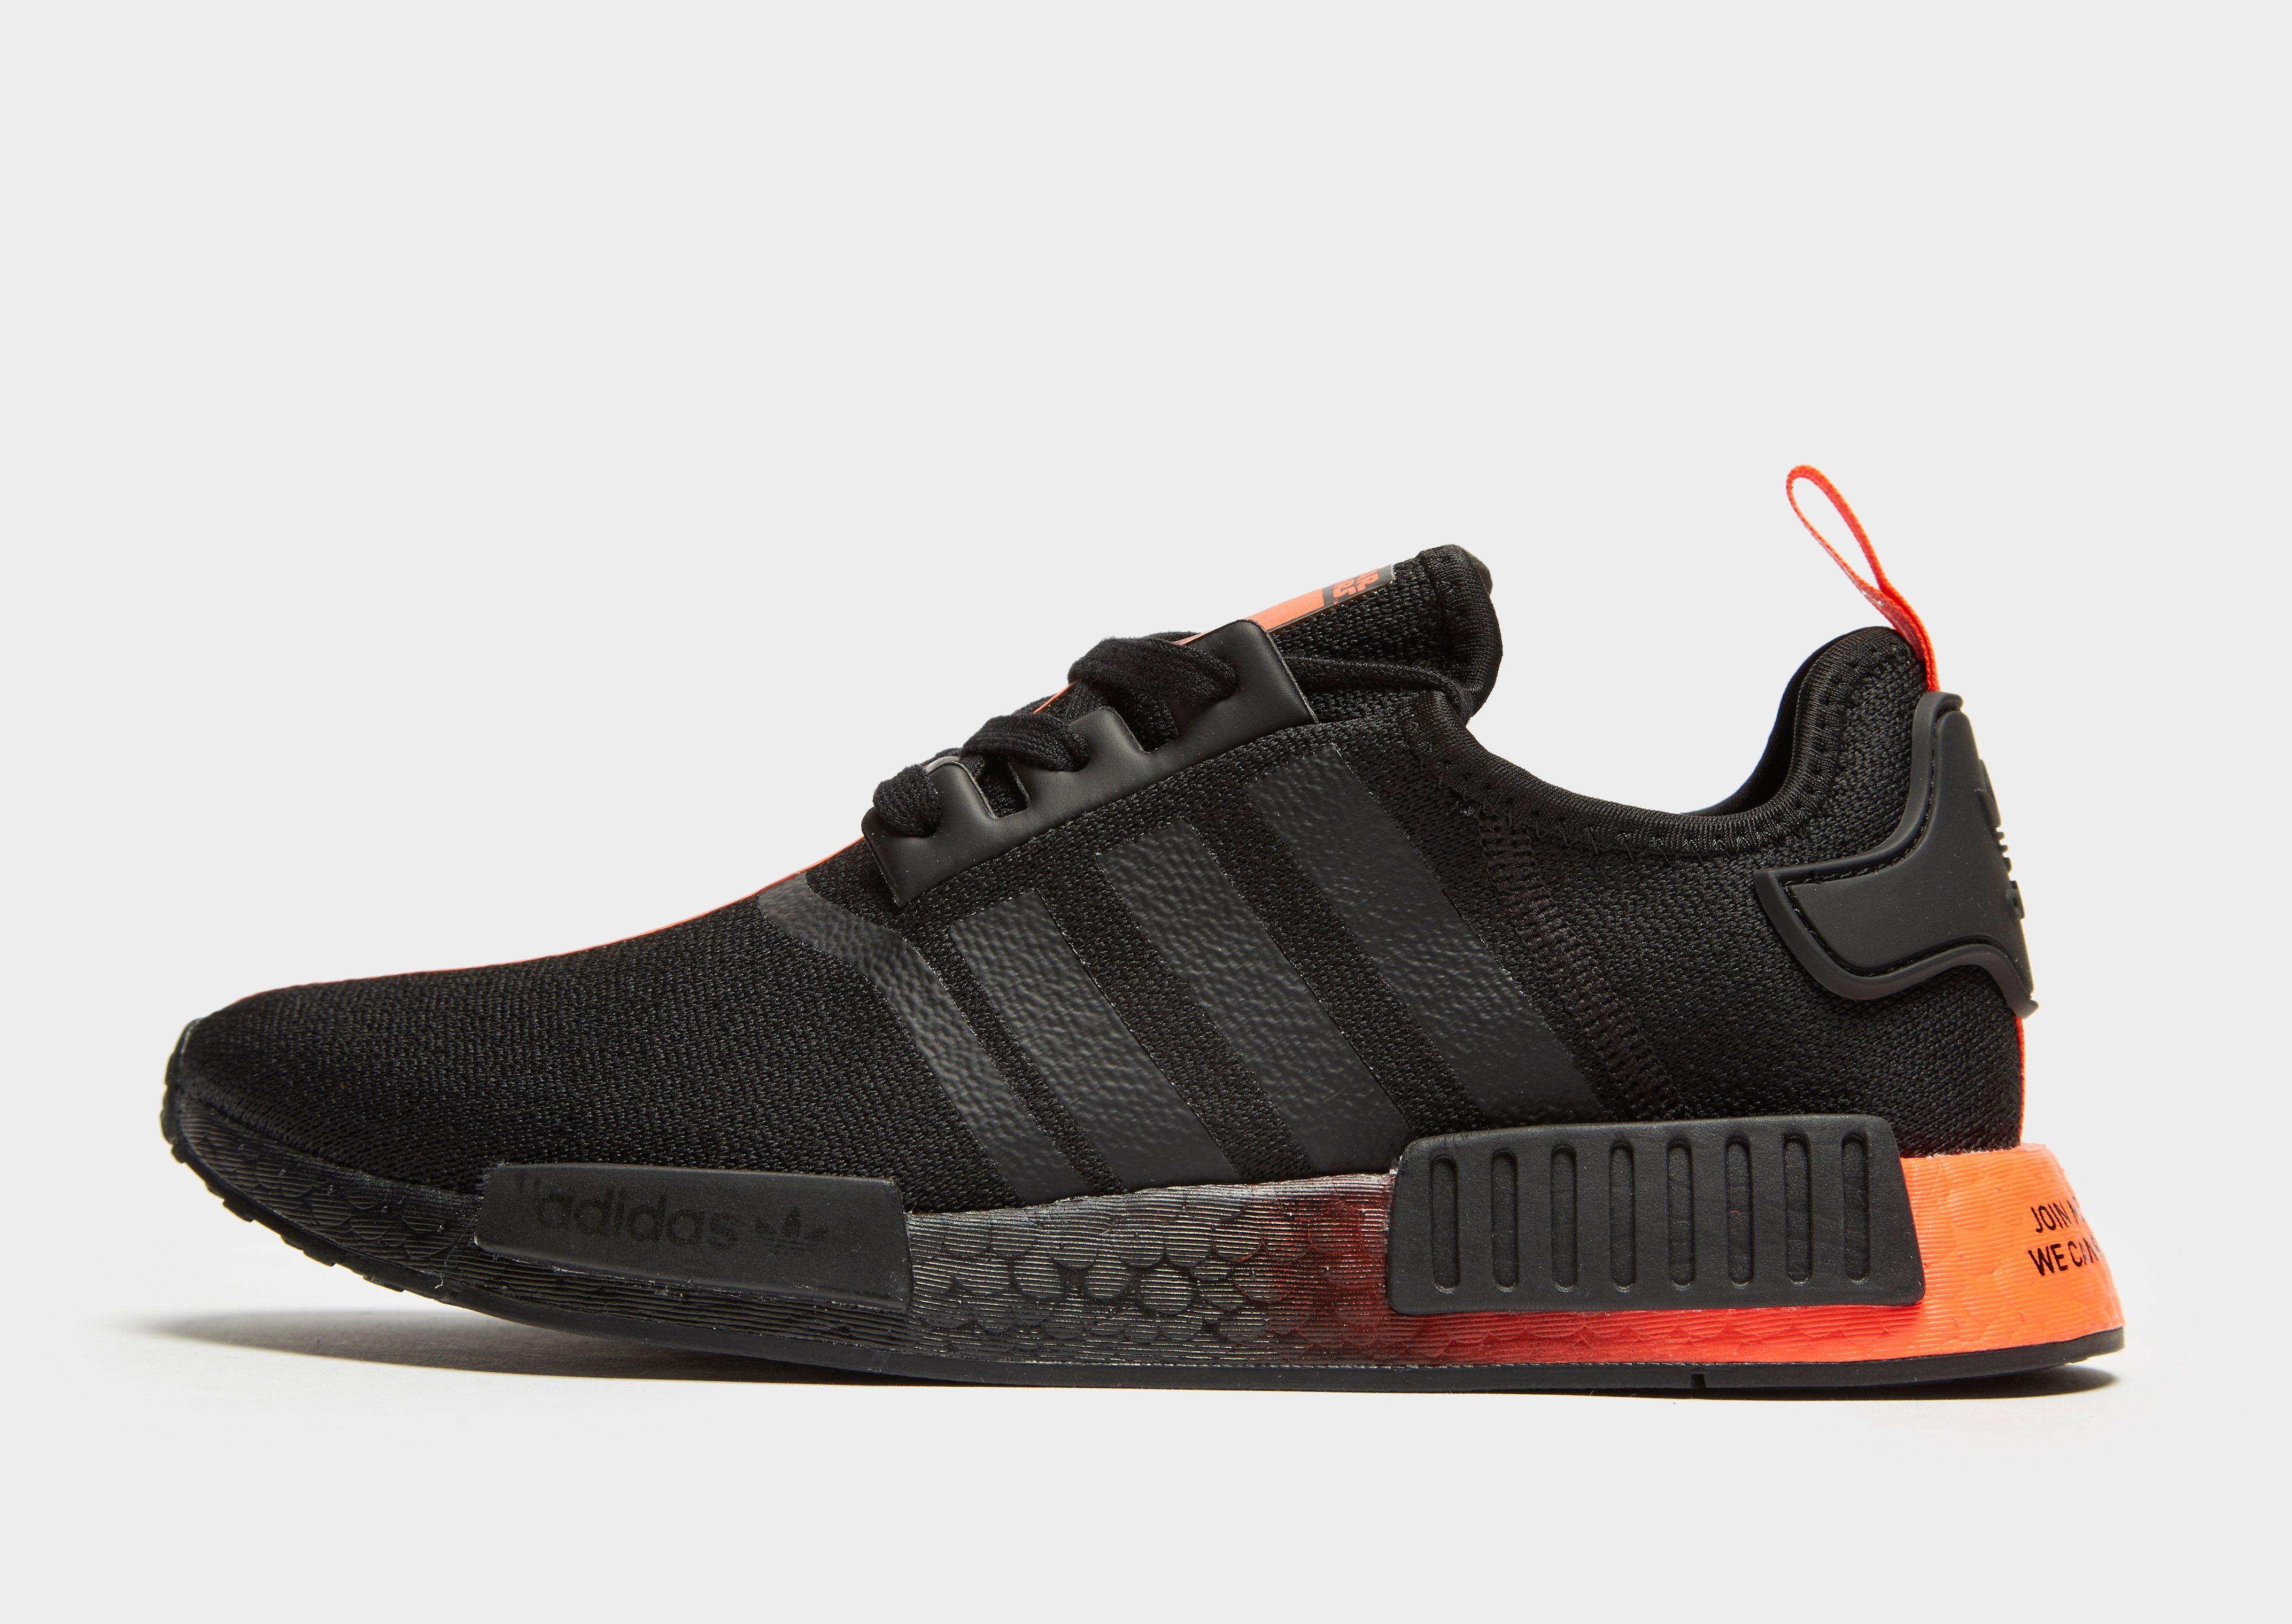 adidas NMD R1 Primeknit Arriving in New Striped Colorways